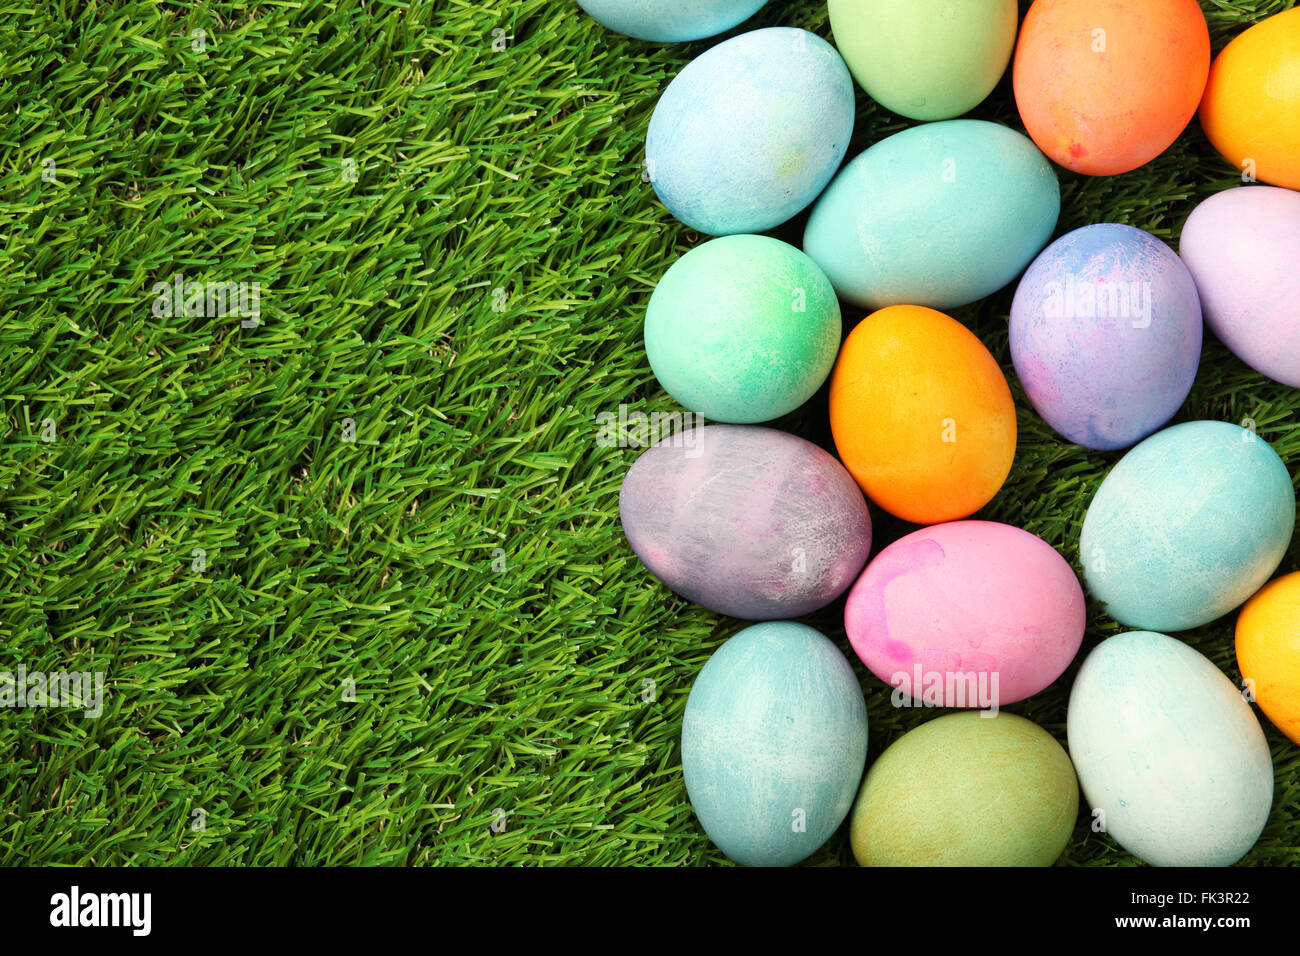 Colorful Easter eggs on grass background Stock Photo